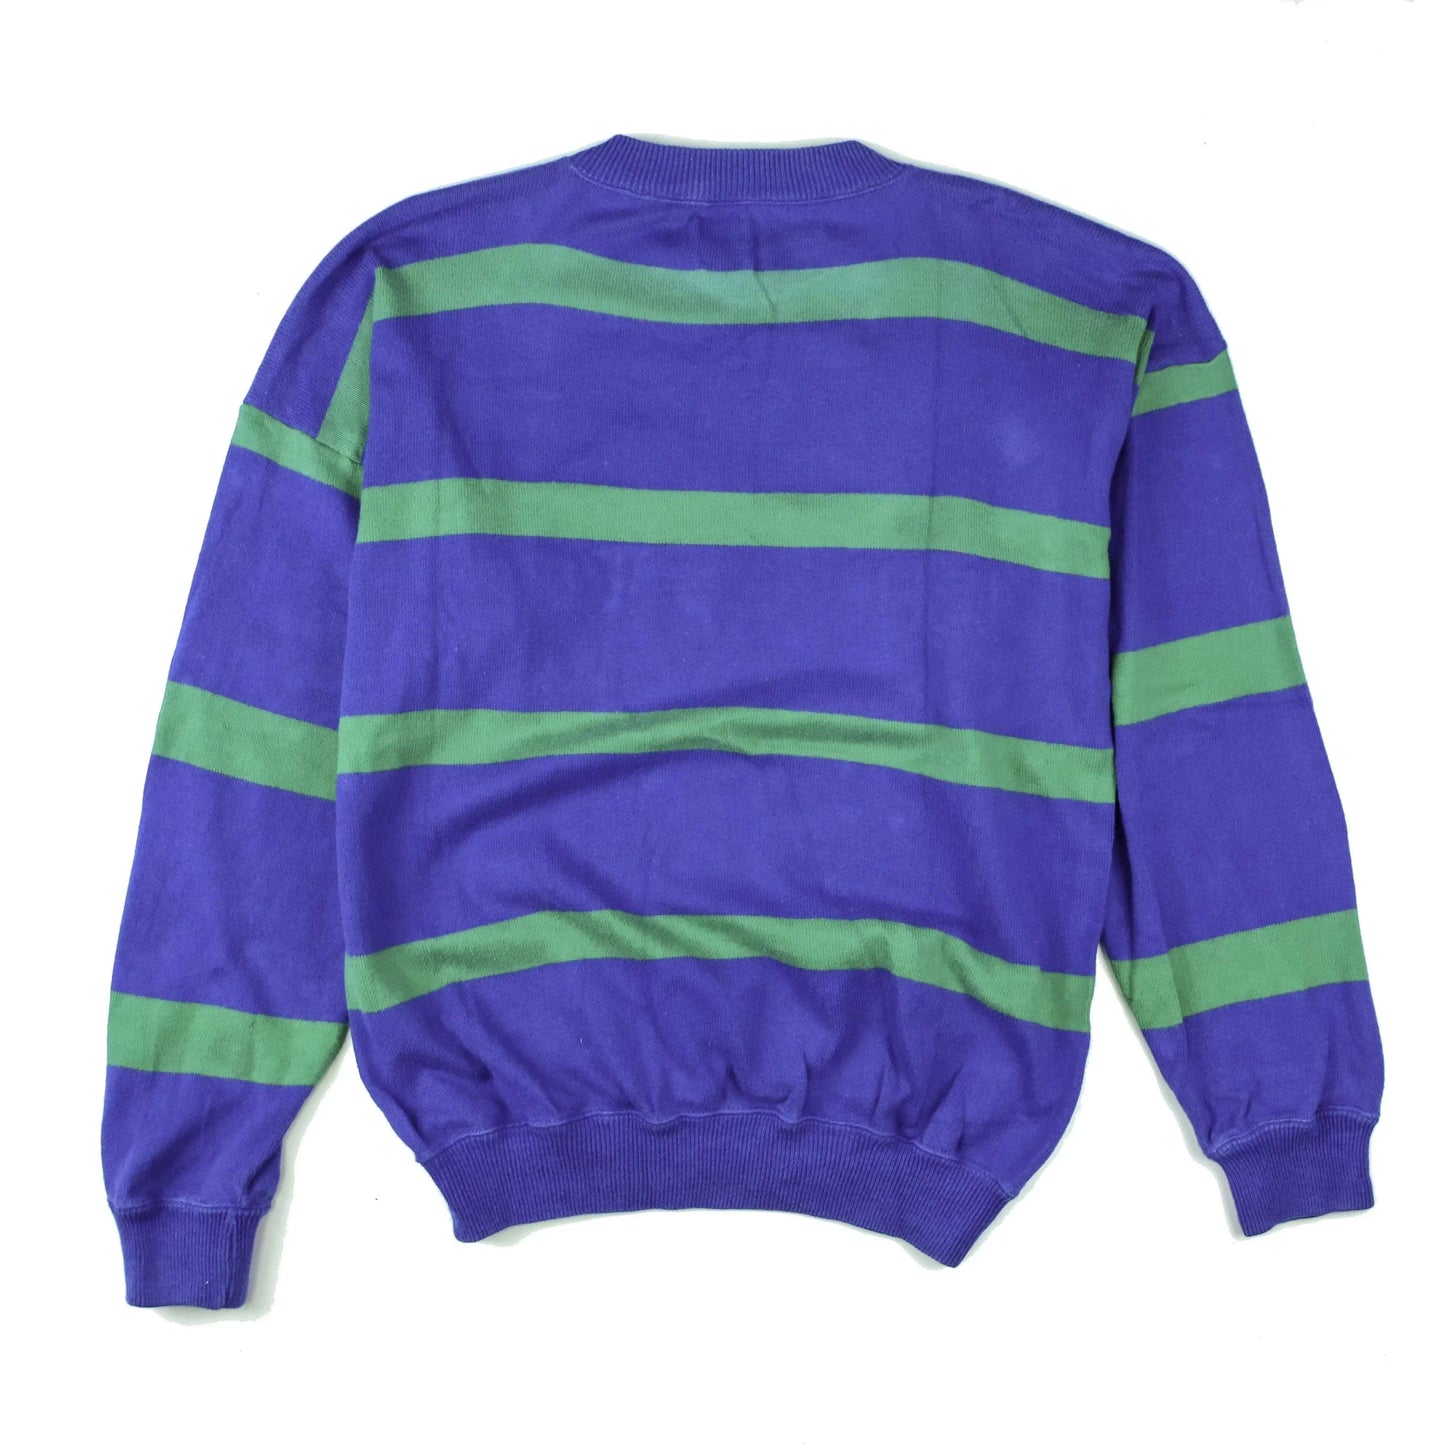 BENETTON 90S STRIPED SWEATER (S) - Known Source